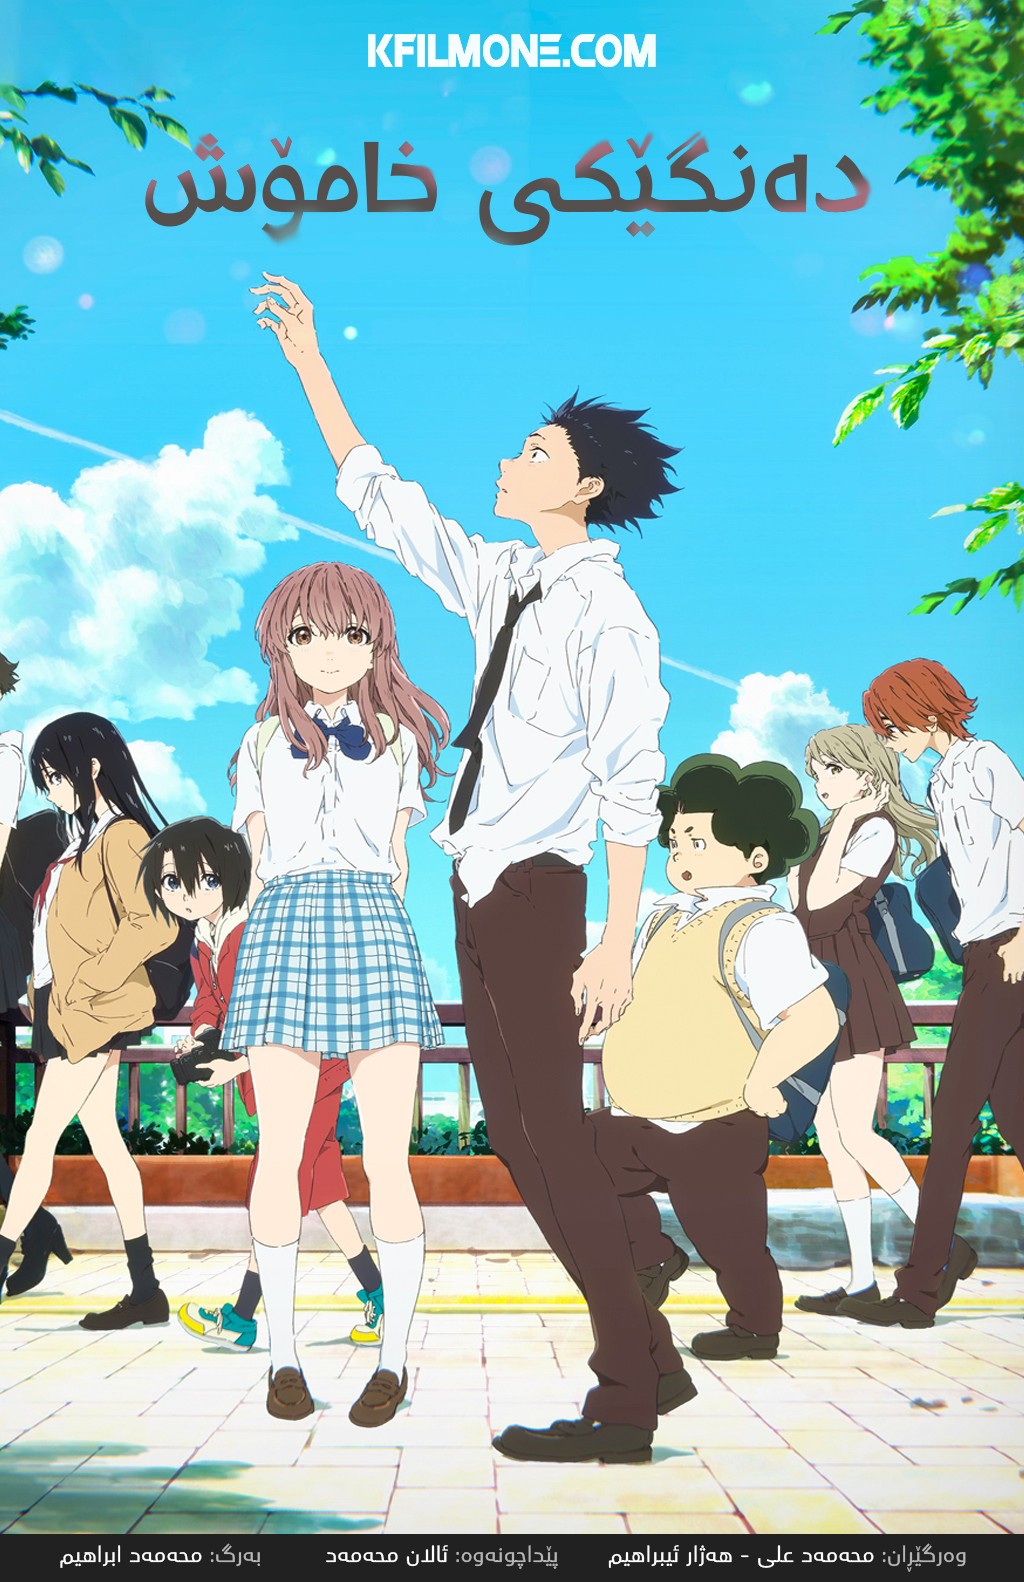 A Silent Voice: The Movie (2016)